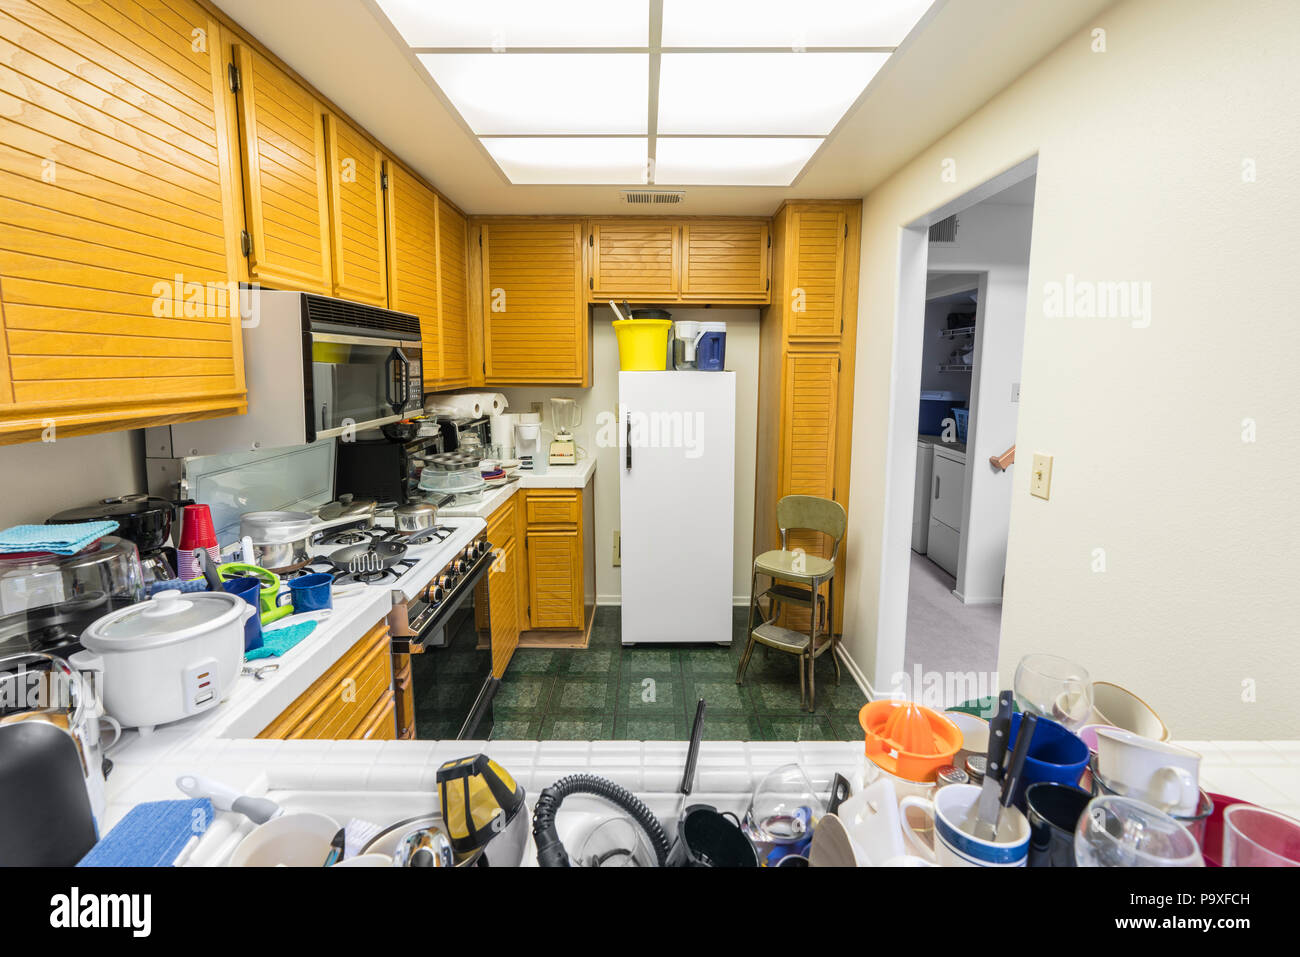 Messy condo kitchen with oak cabinets, tile countertops, gas stove, green flooring and piles of dishes. Stock Photo